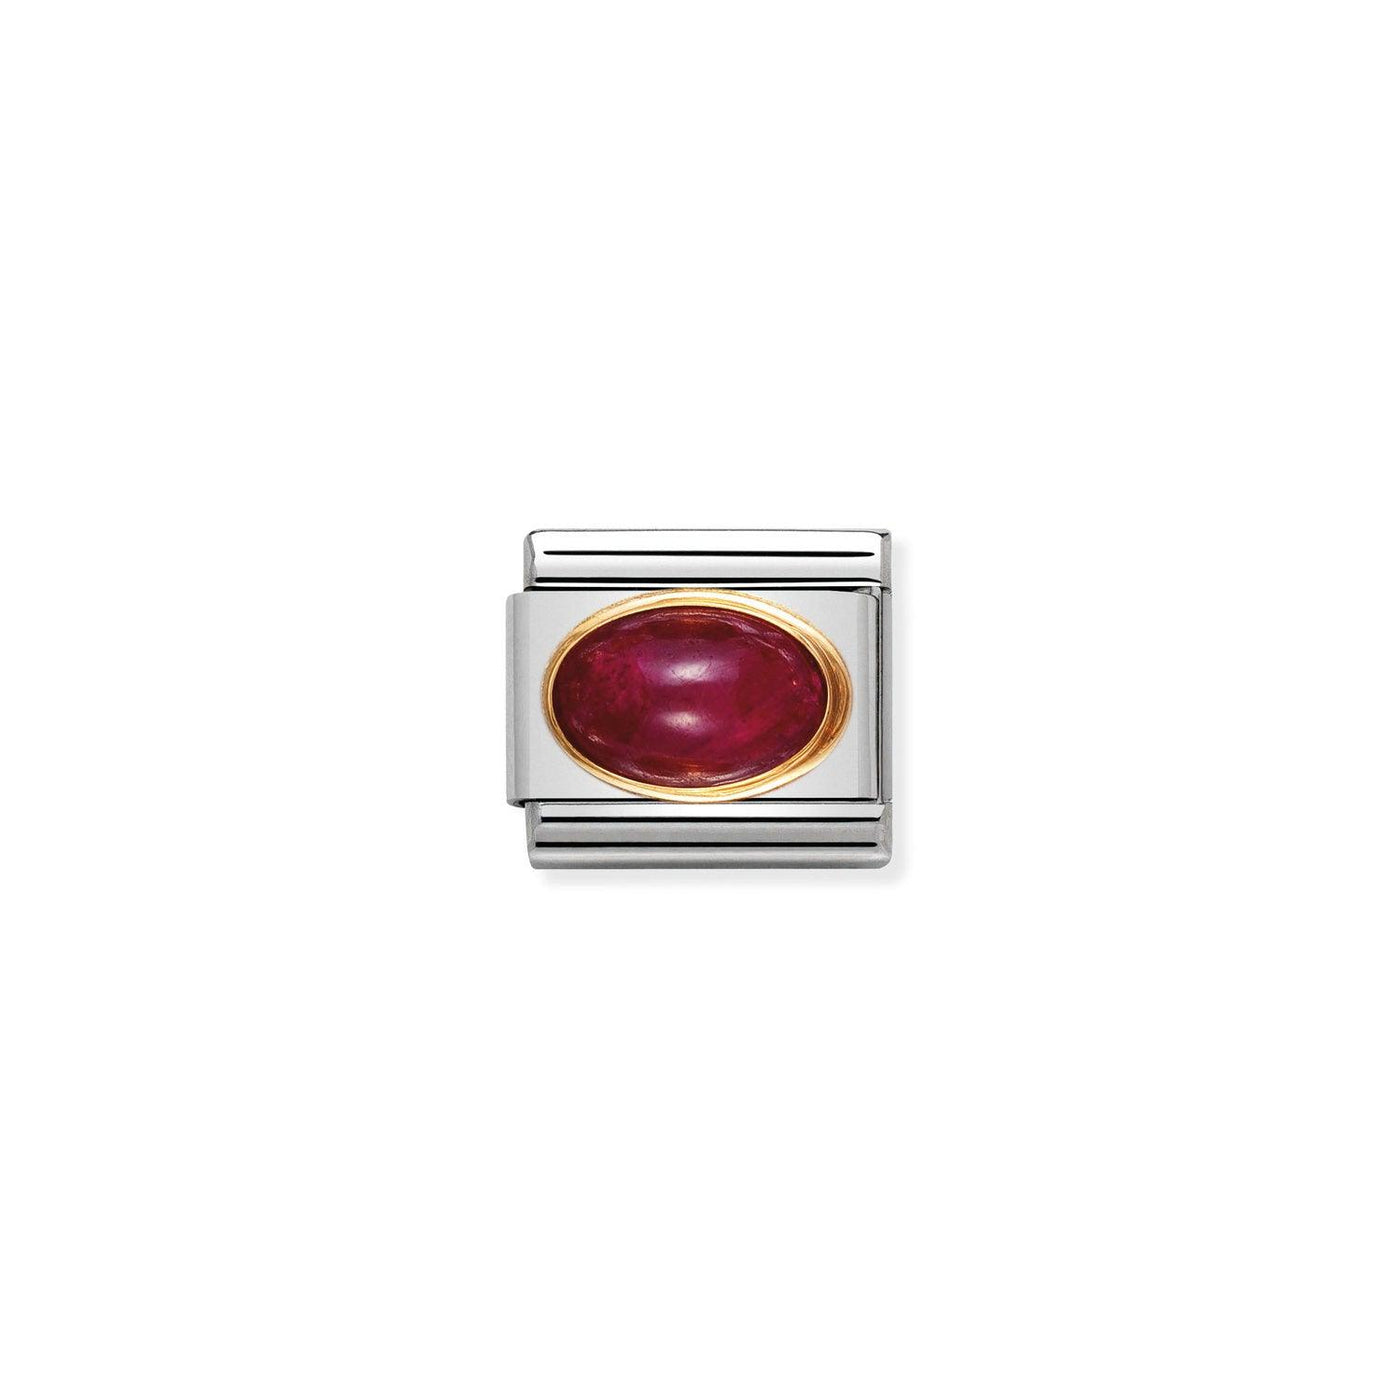 Nomination Classic Ruby 18ct Gold Charm - Rococo Jewellery